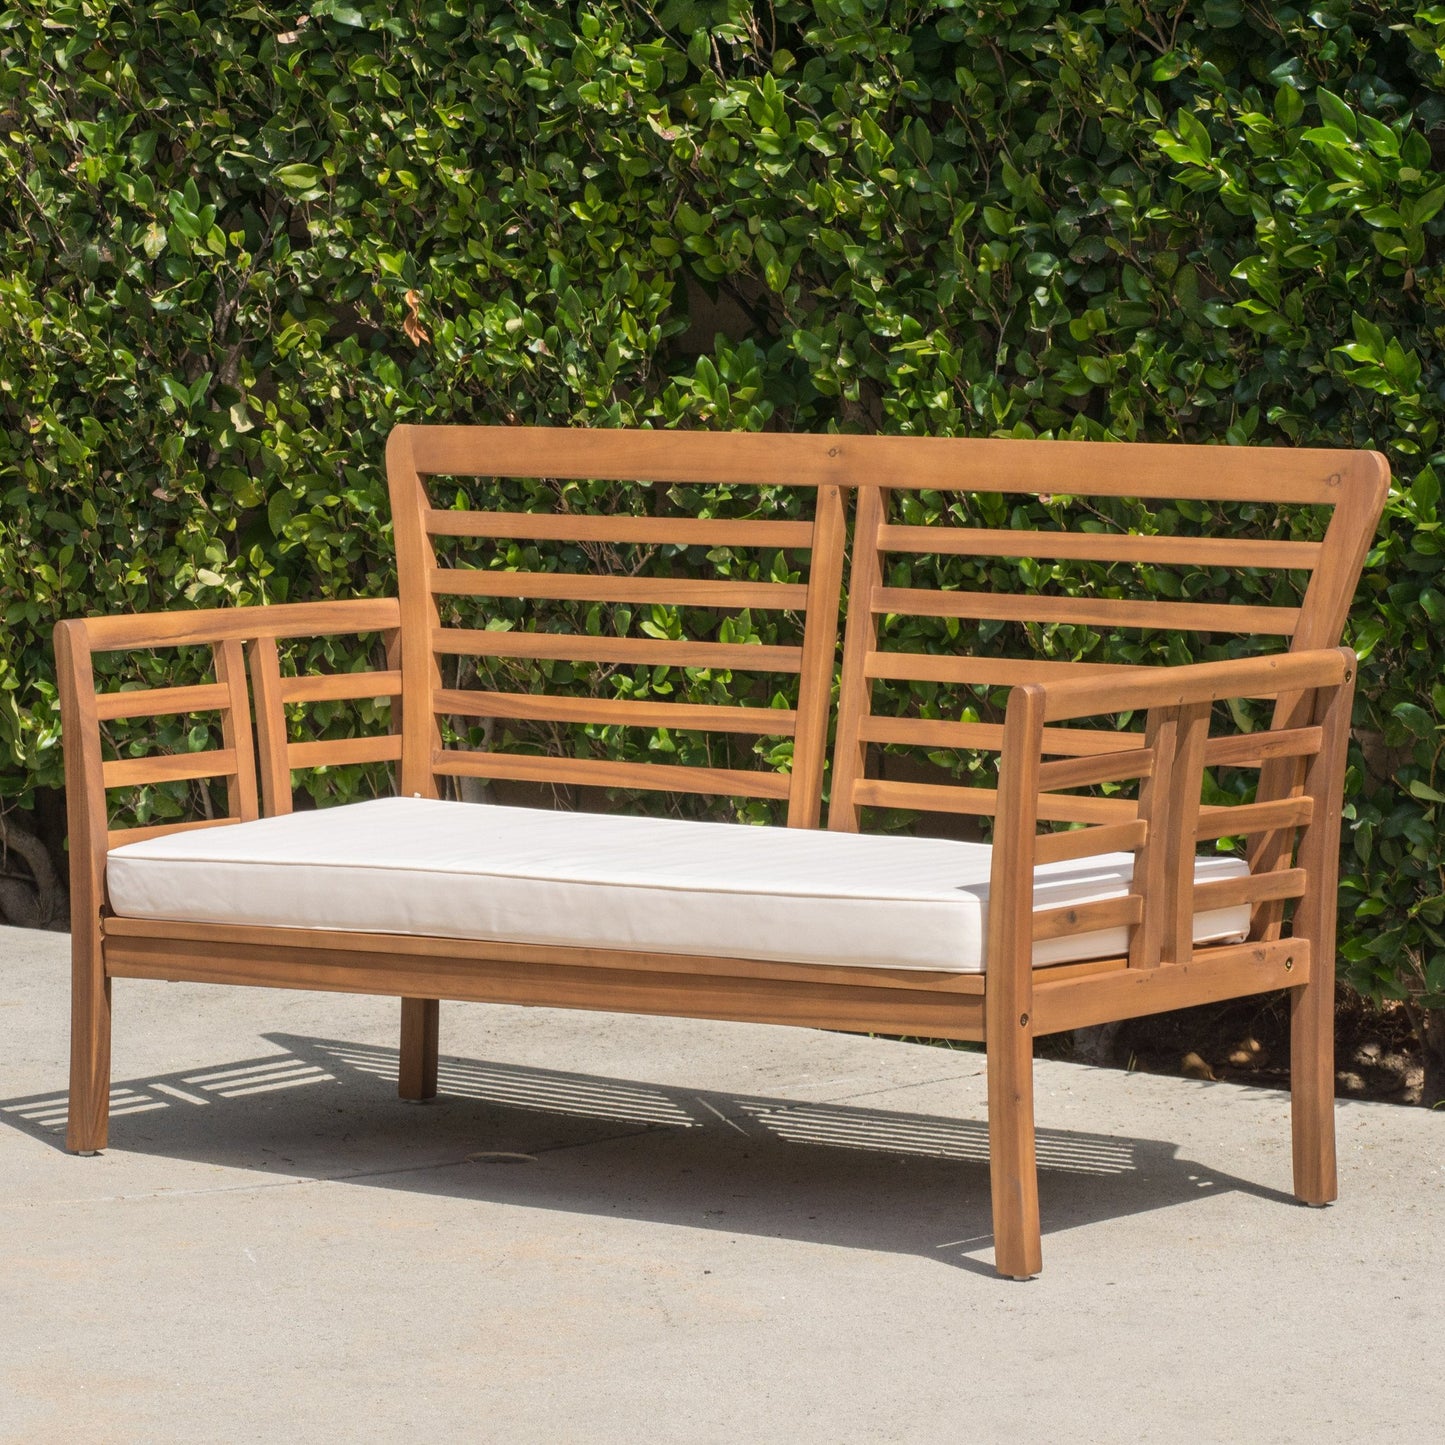 Louis Outdoor 4-piece Solid Wood Chat Set with Cushions